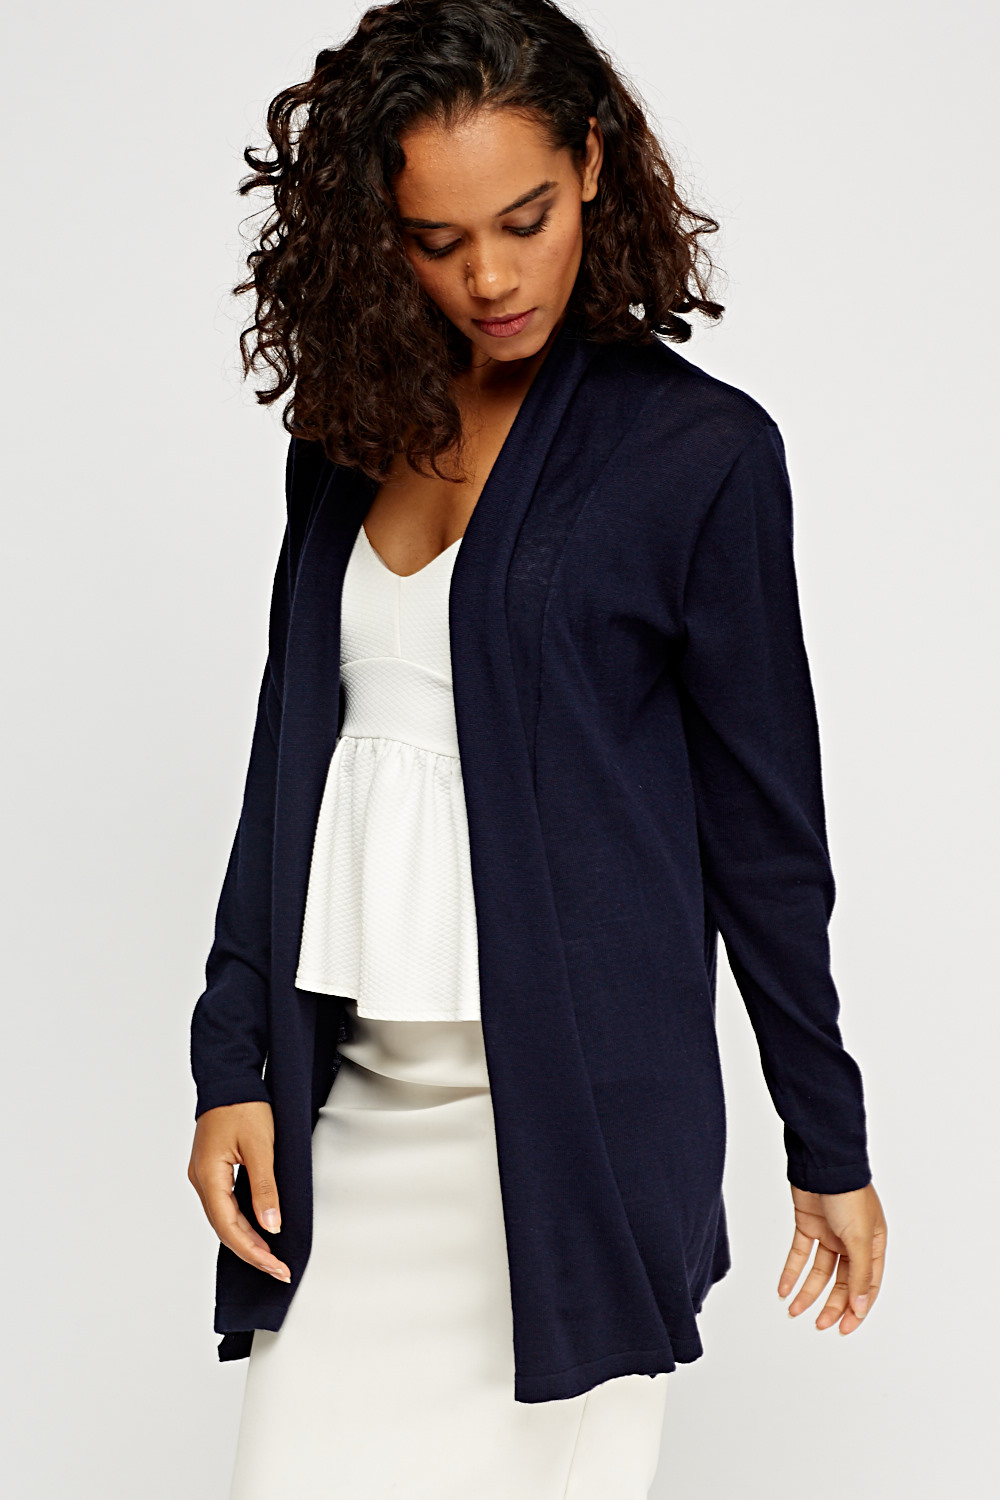 Waterfall Open Front Cardigan - Just $7